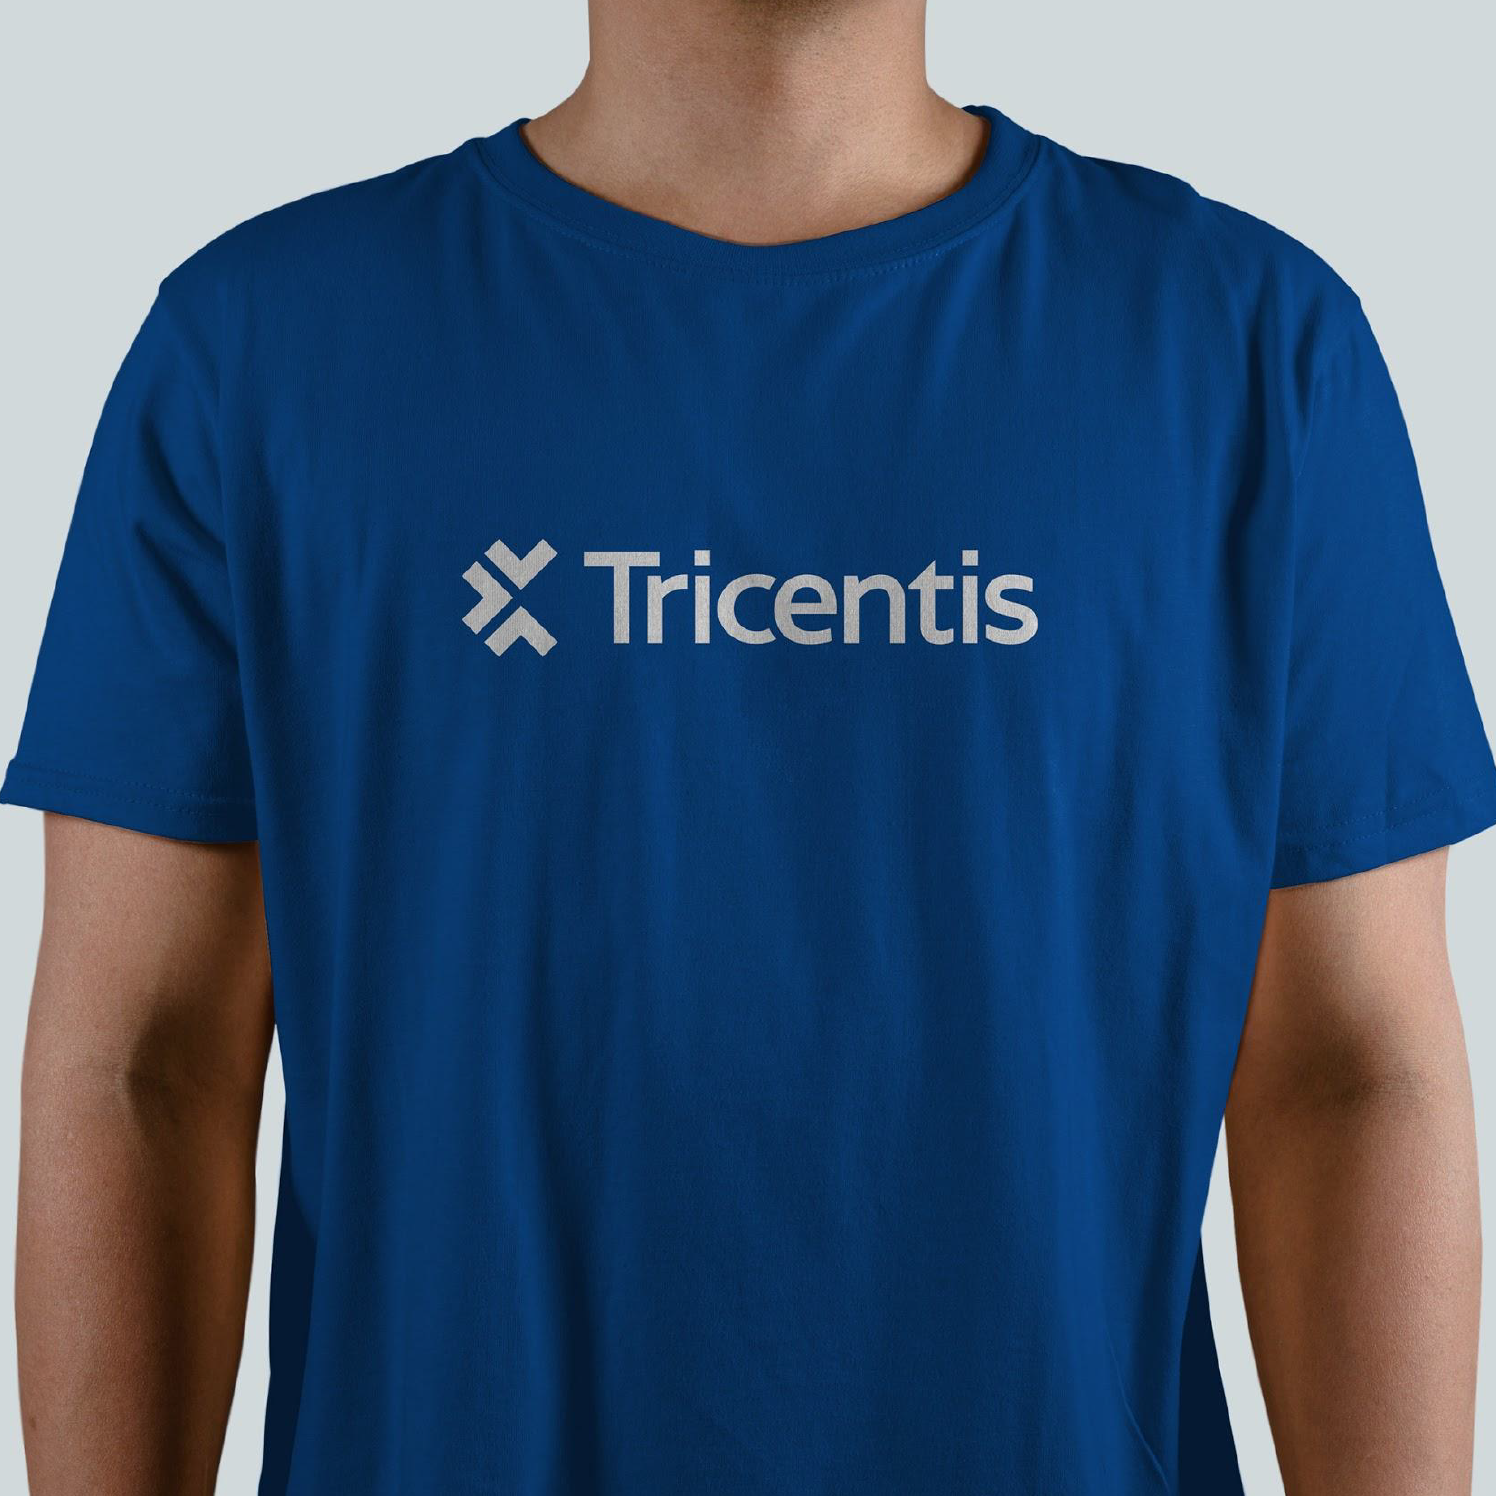 A blue t-shirt with the Tricentis logo 